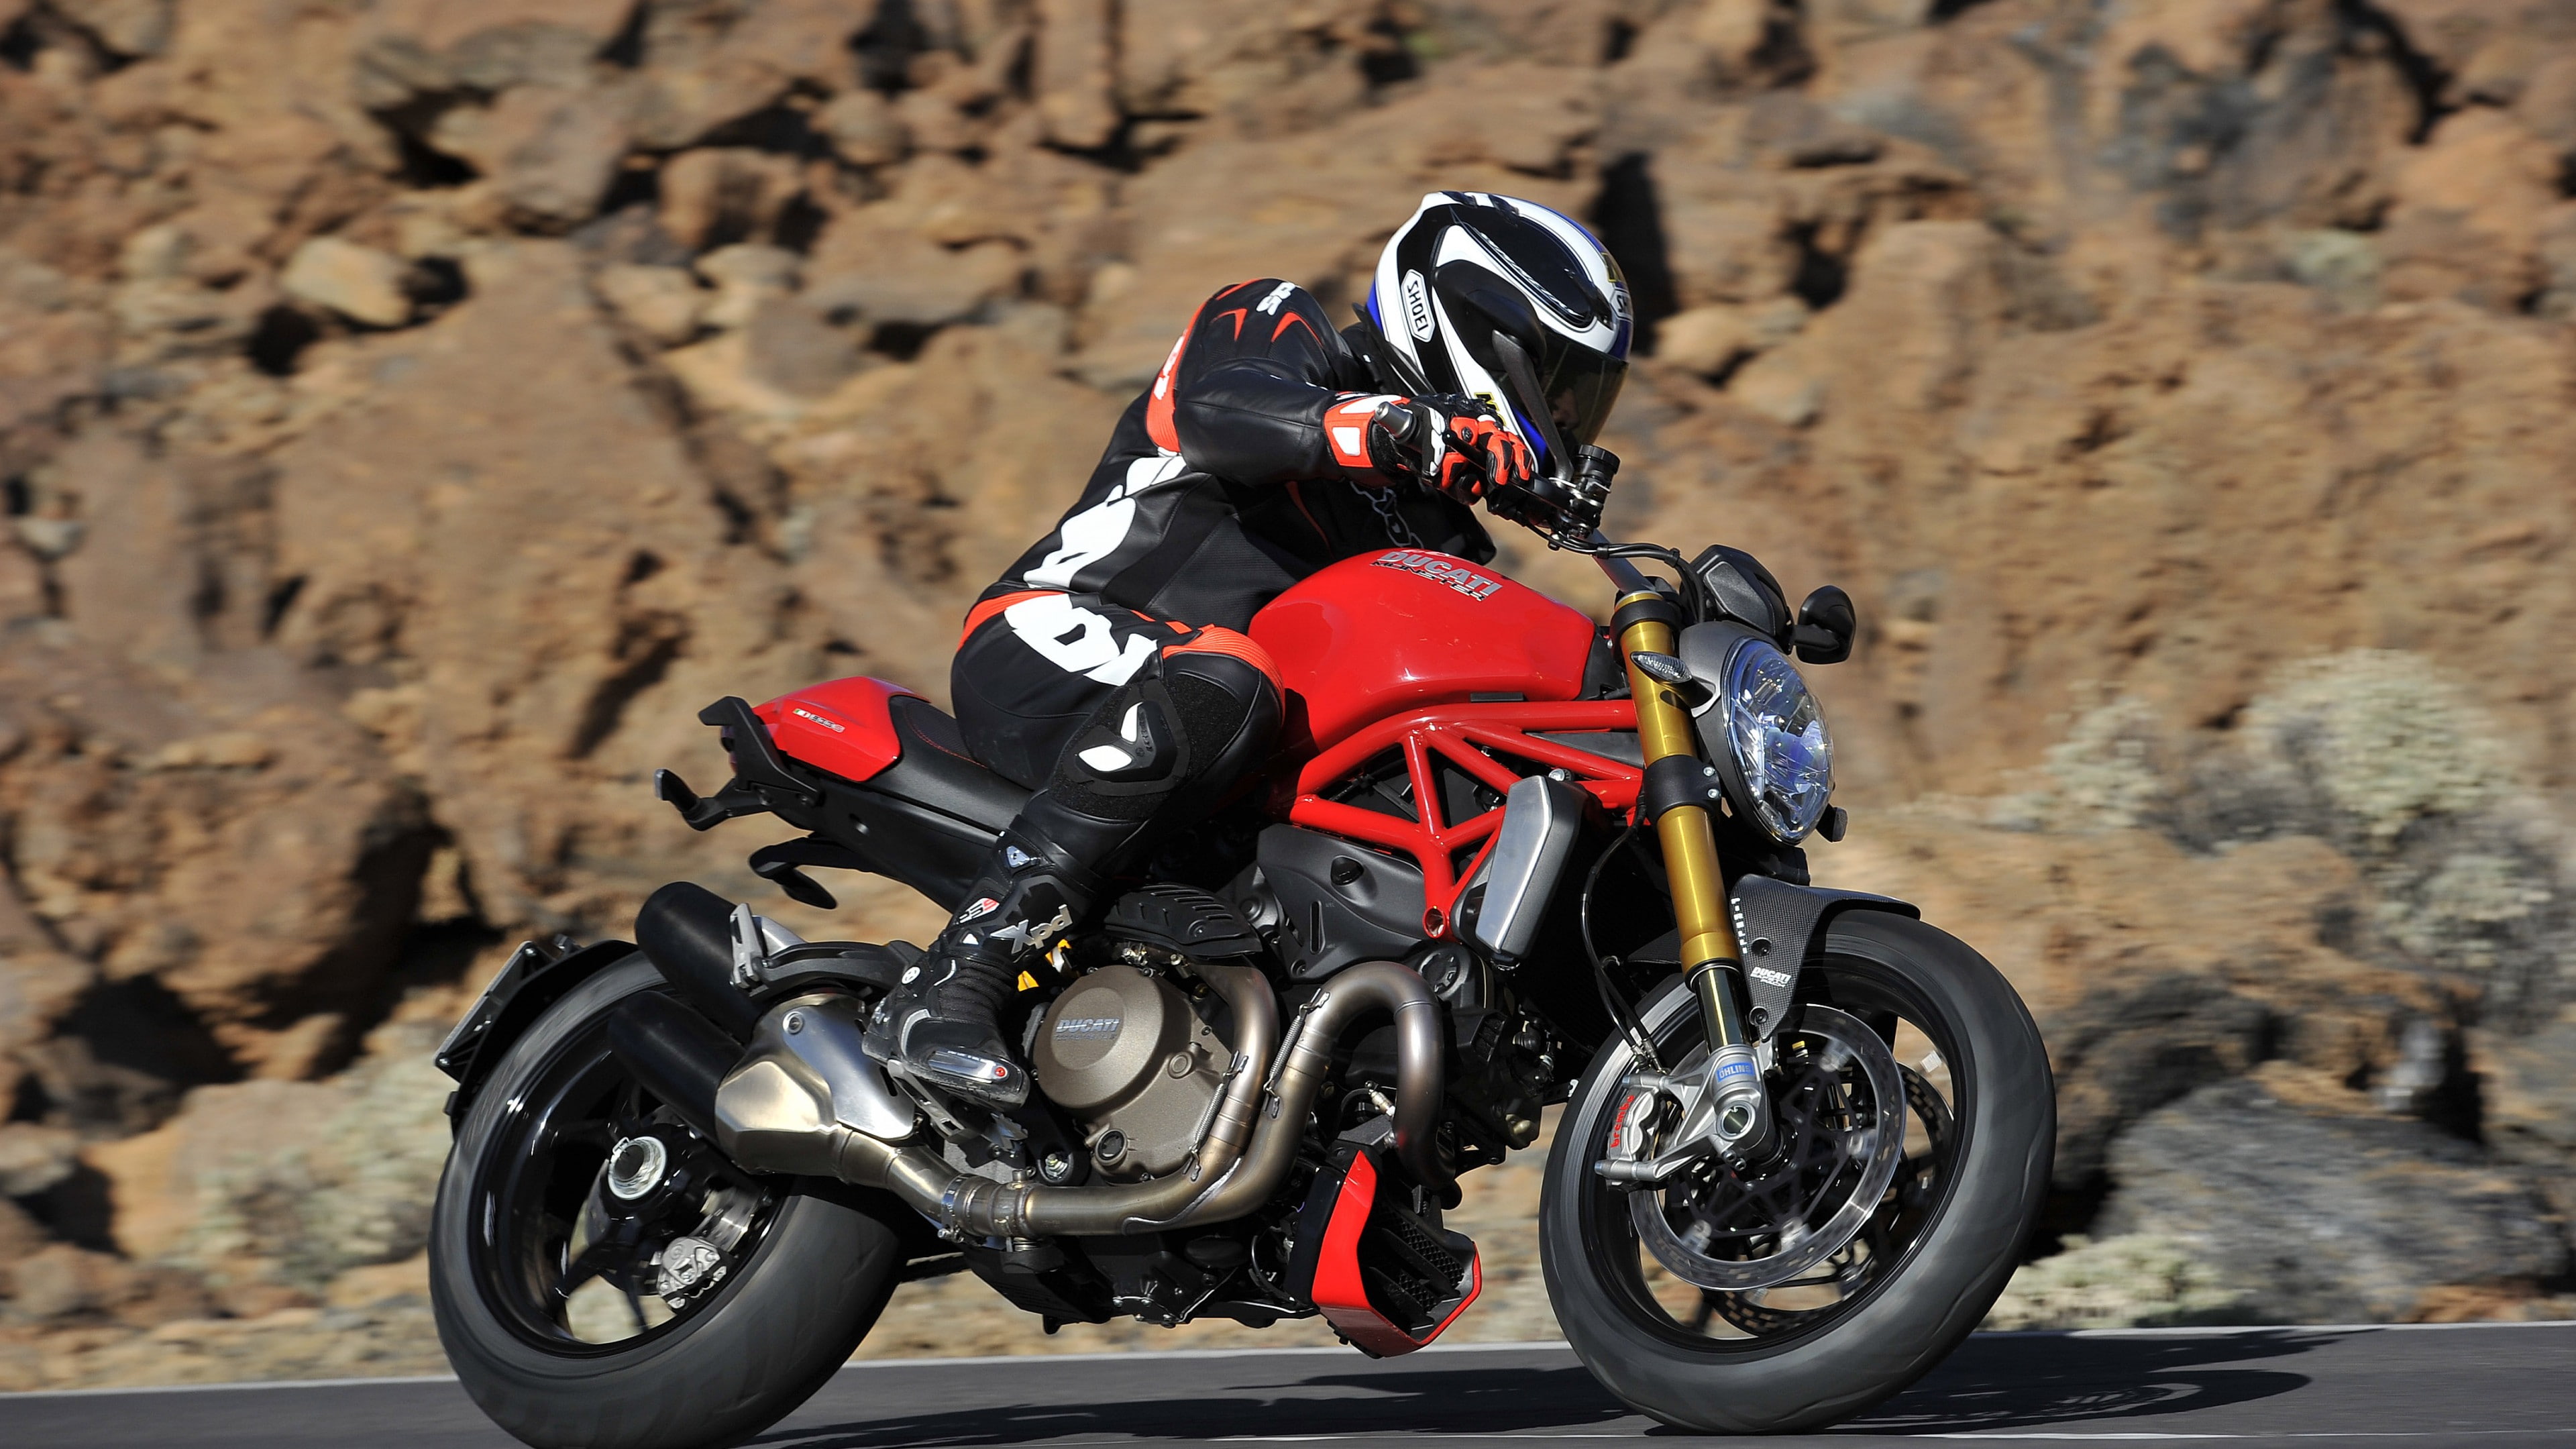 man rides on motorcycle at daytime, Ducati Monster 1200S, Best Bikes 2015